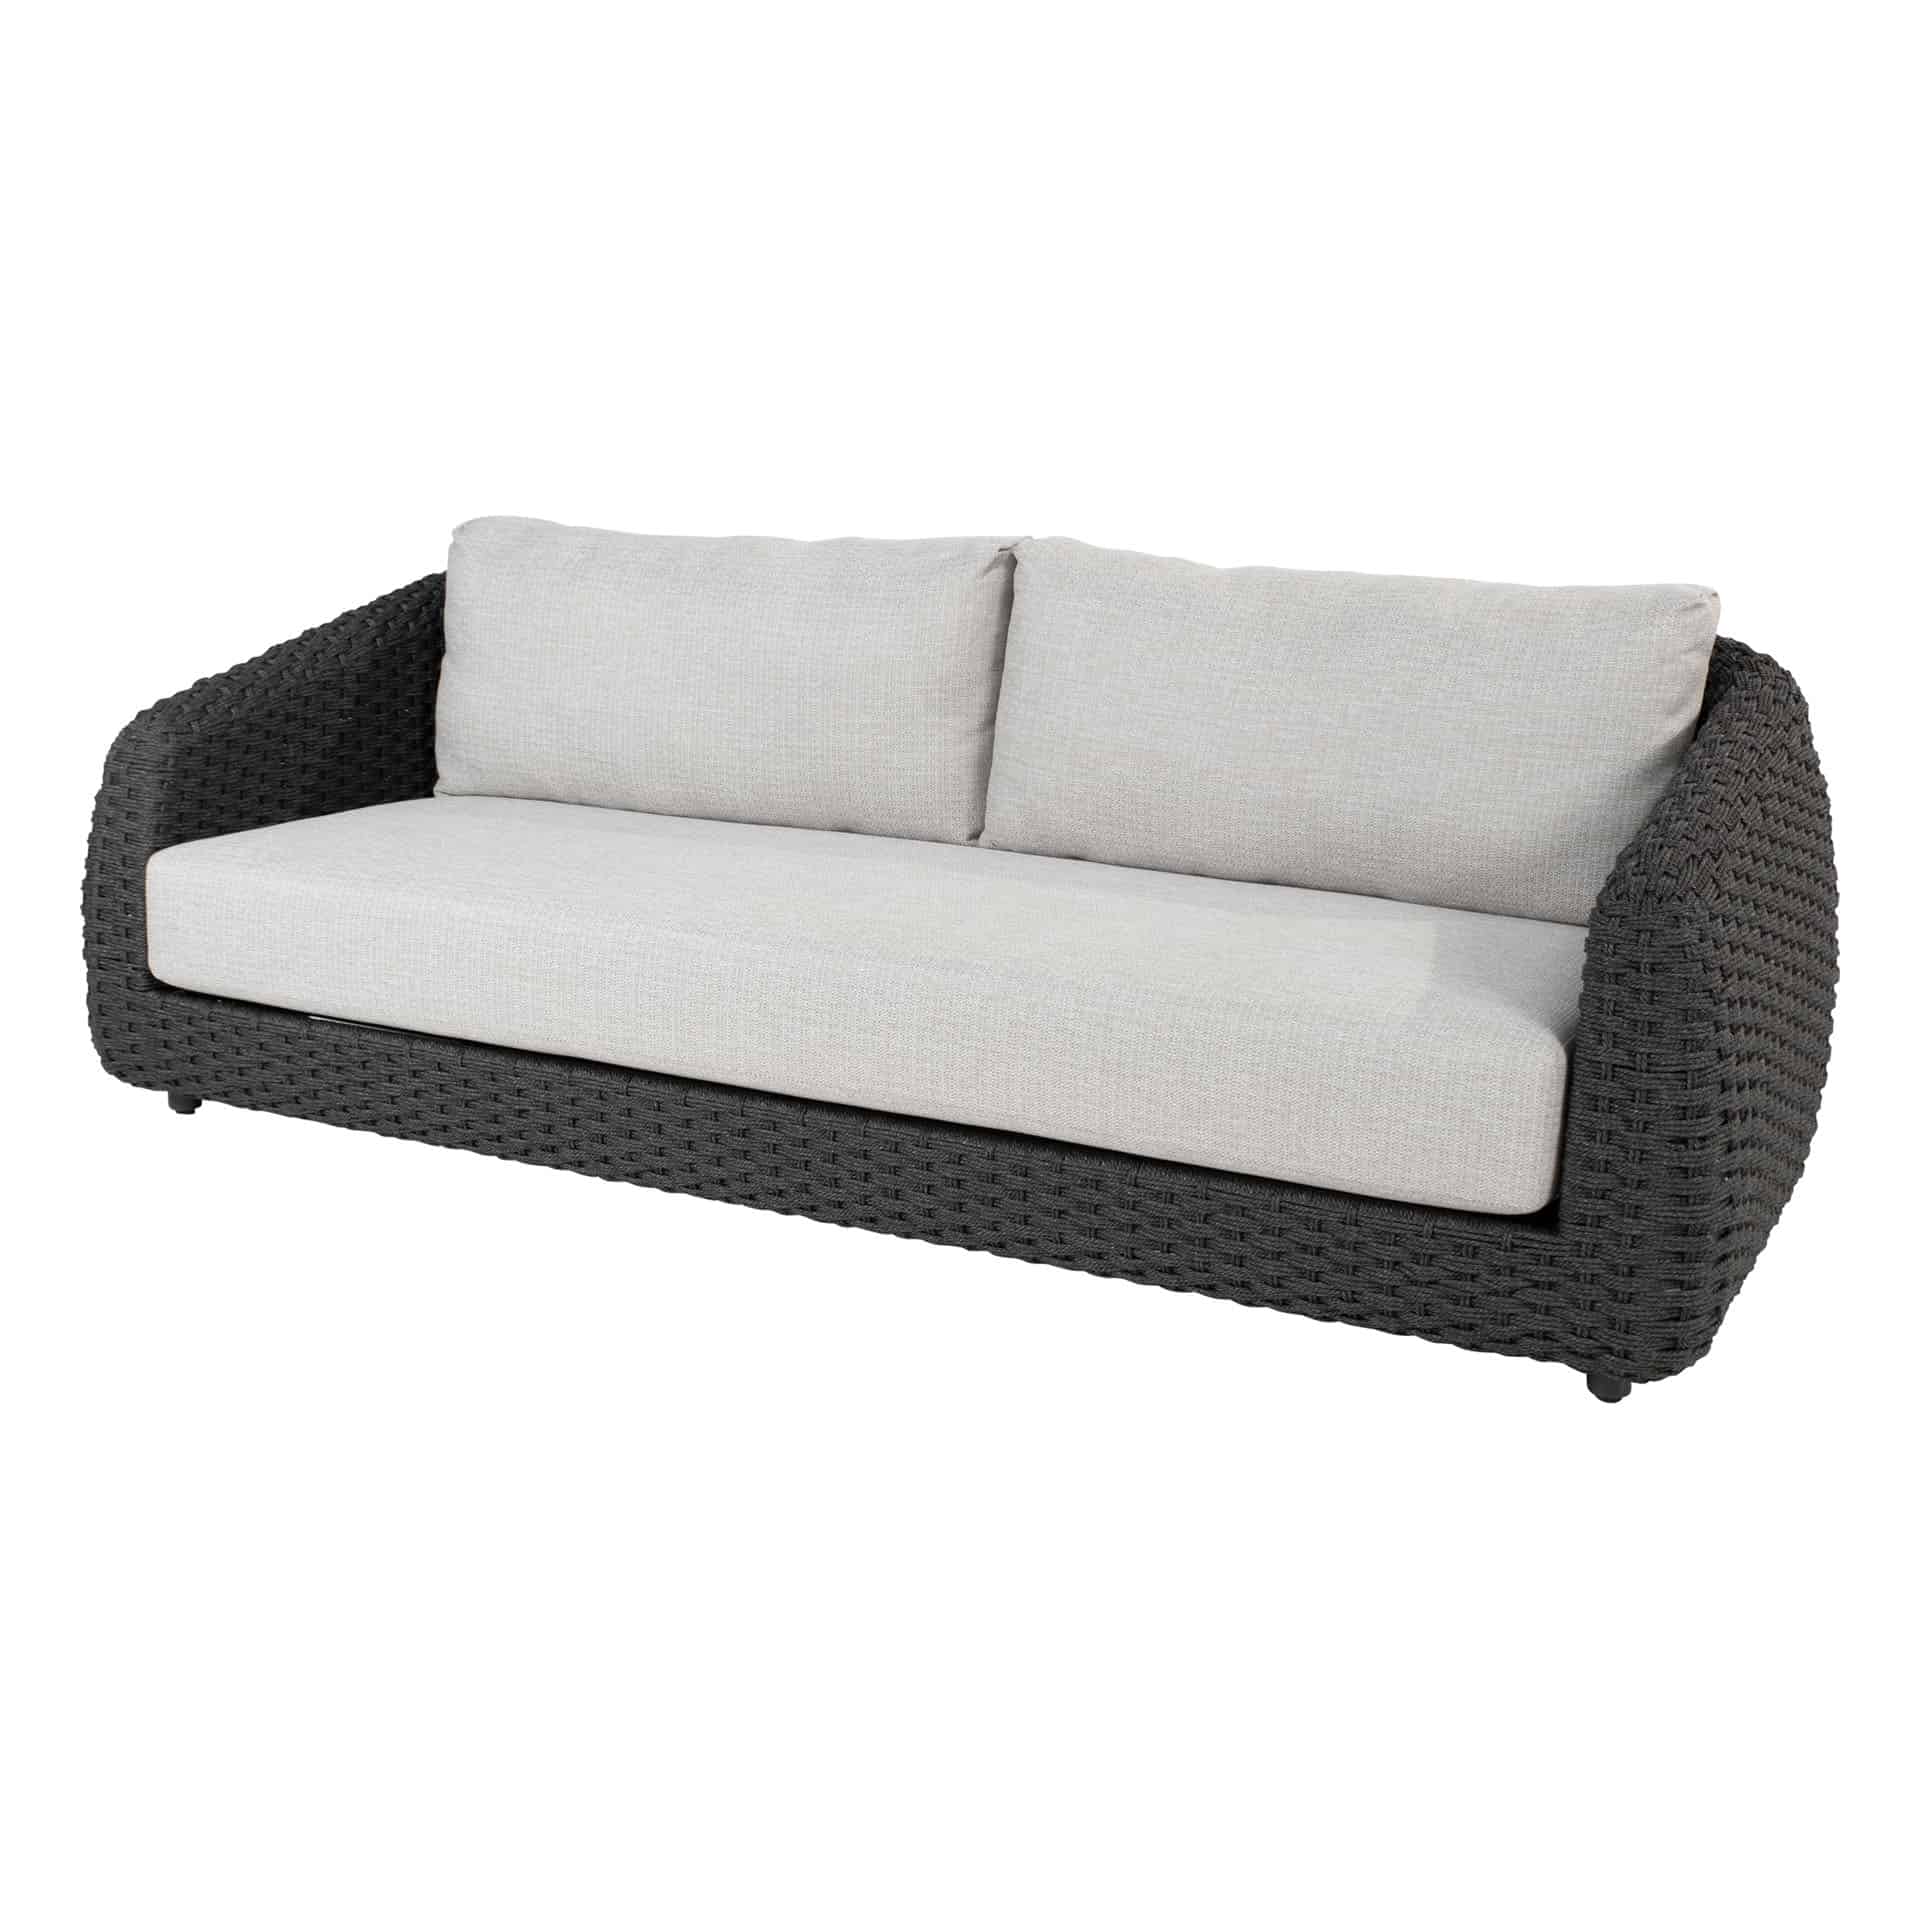 213949_-Saint-Tropez-living-bench-3-seater-anthracite-with-3-cushions-01